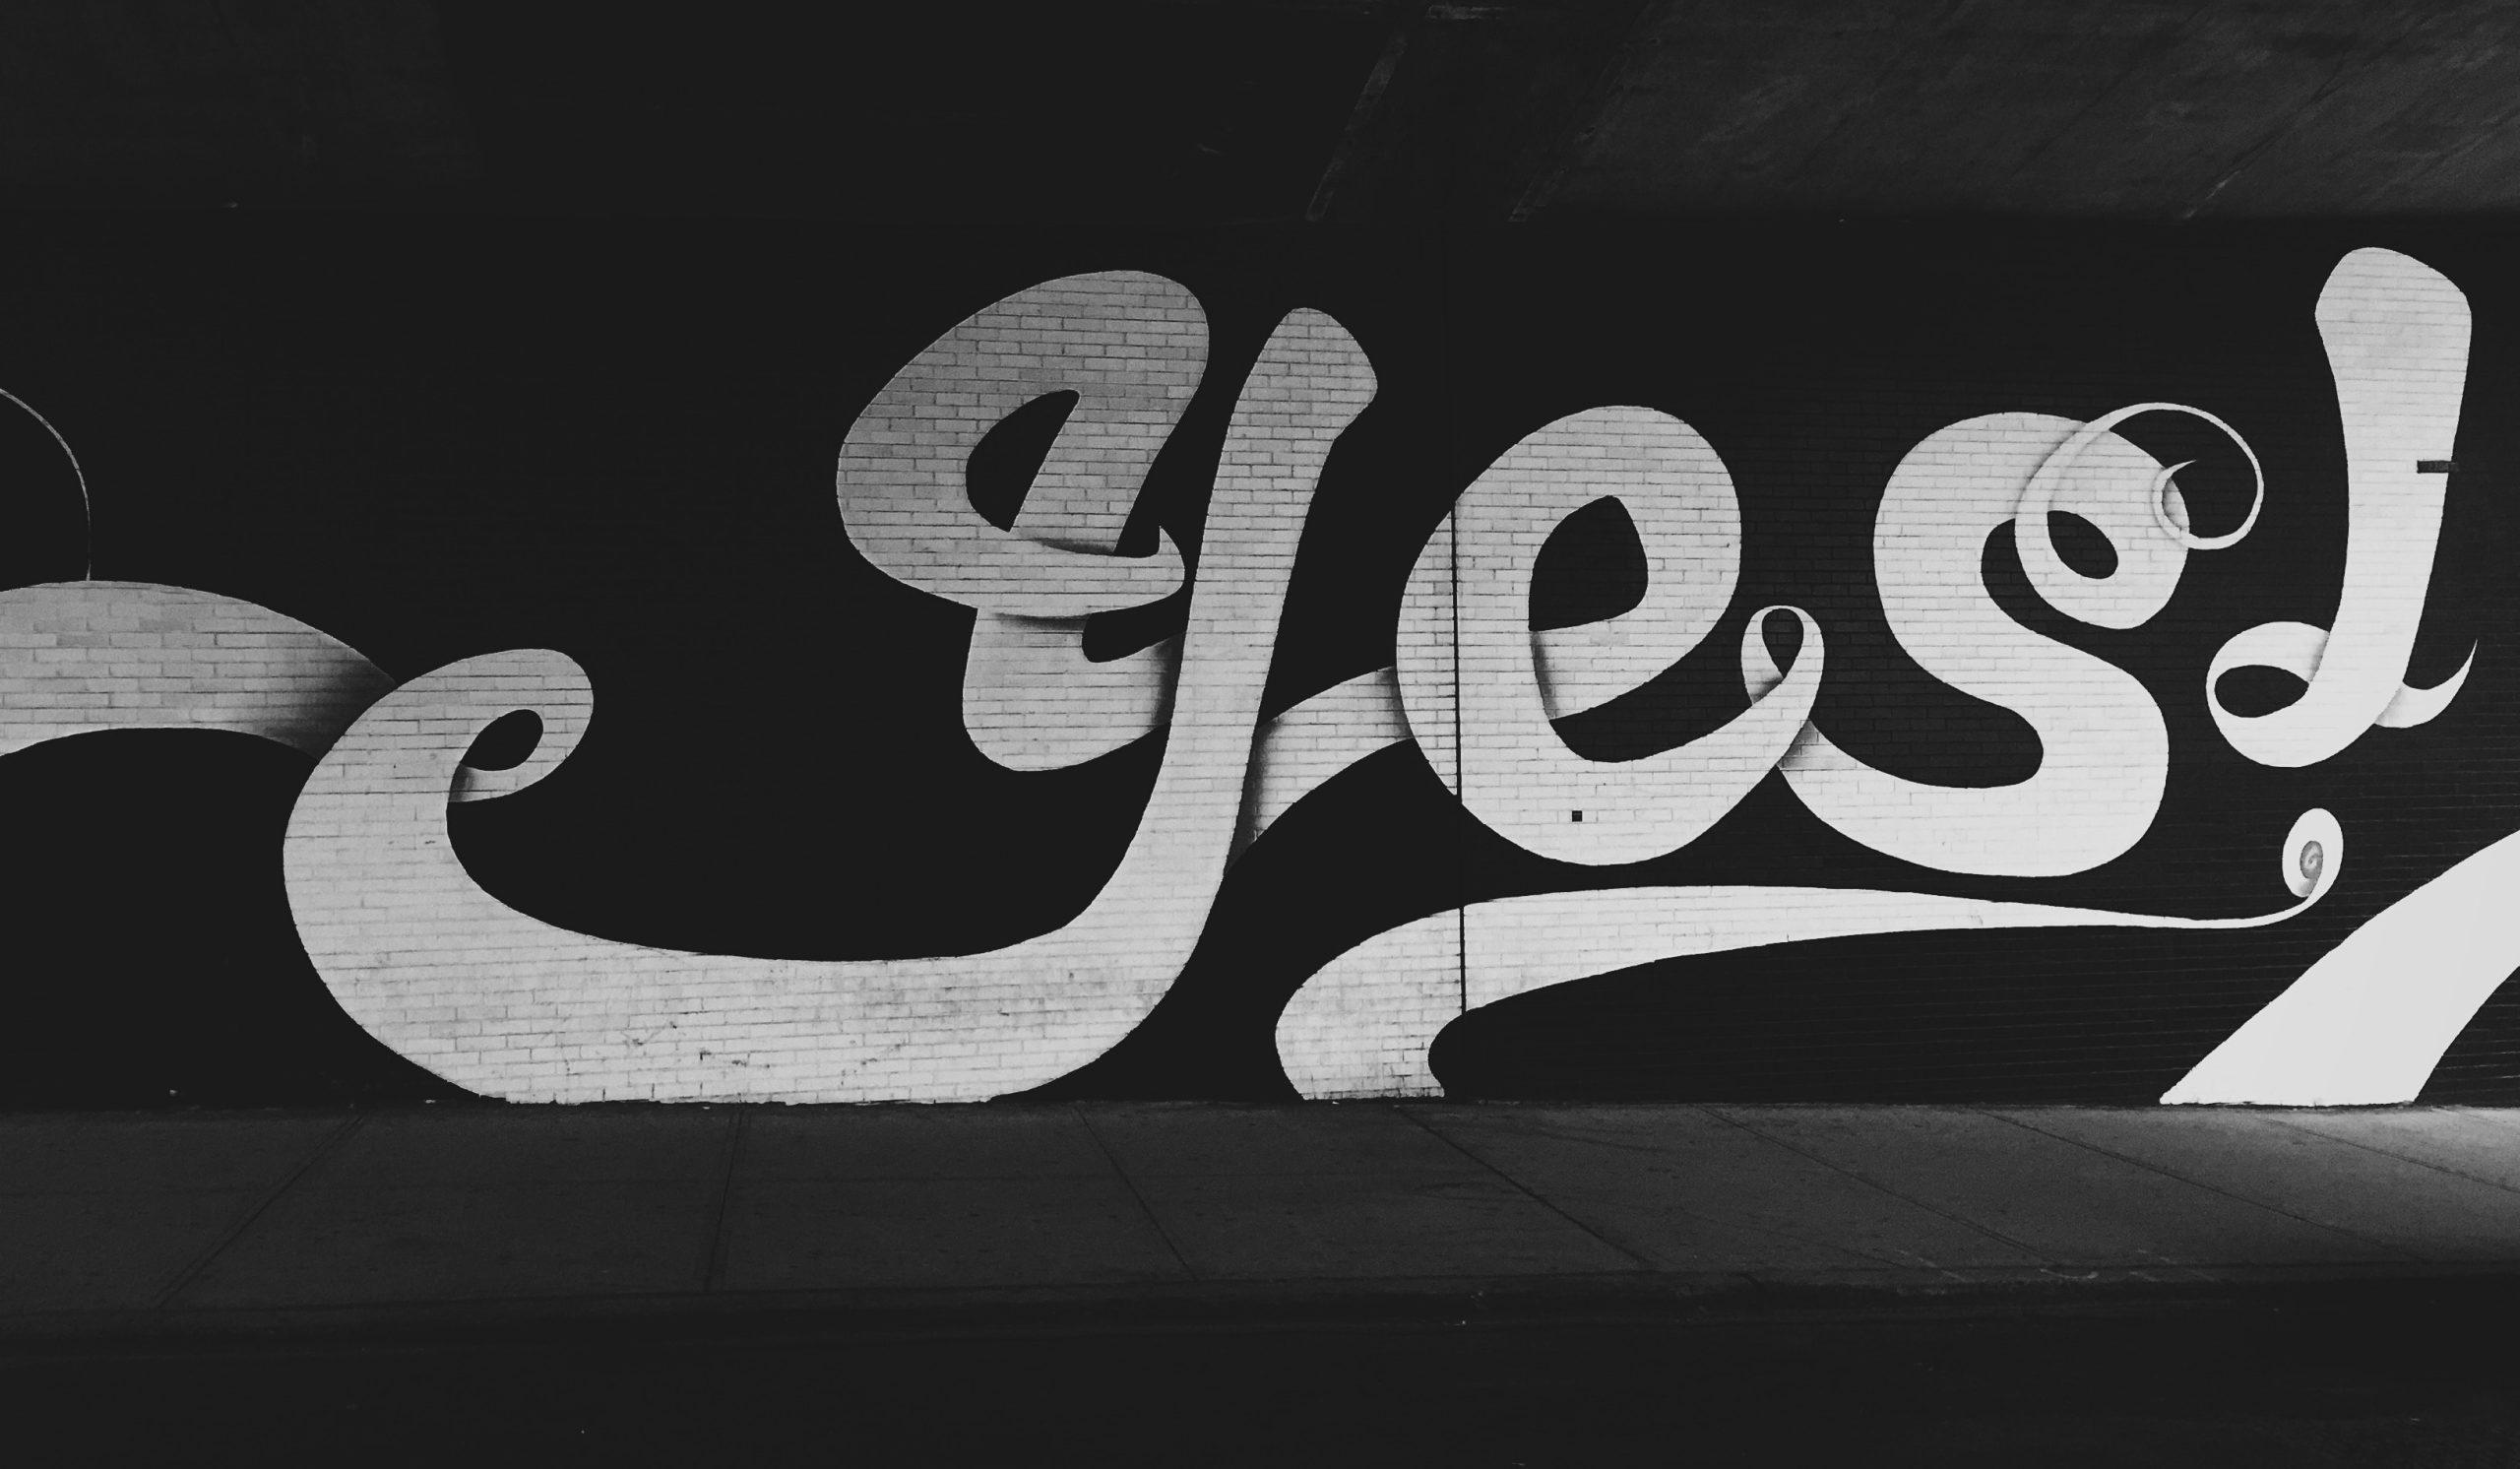 The word 'yes' written on a wall.